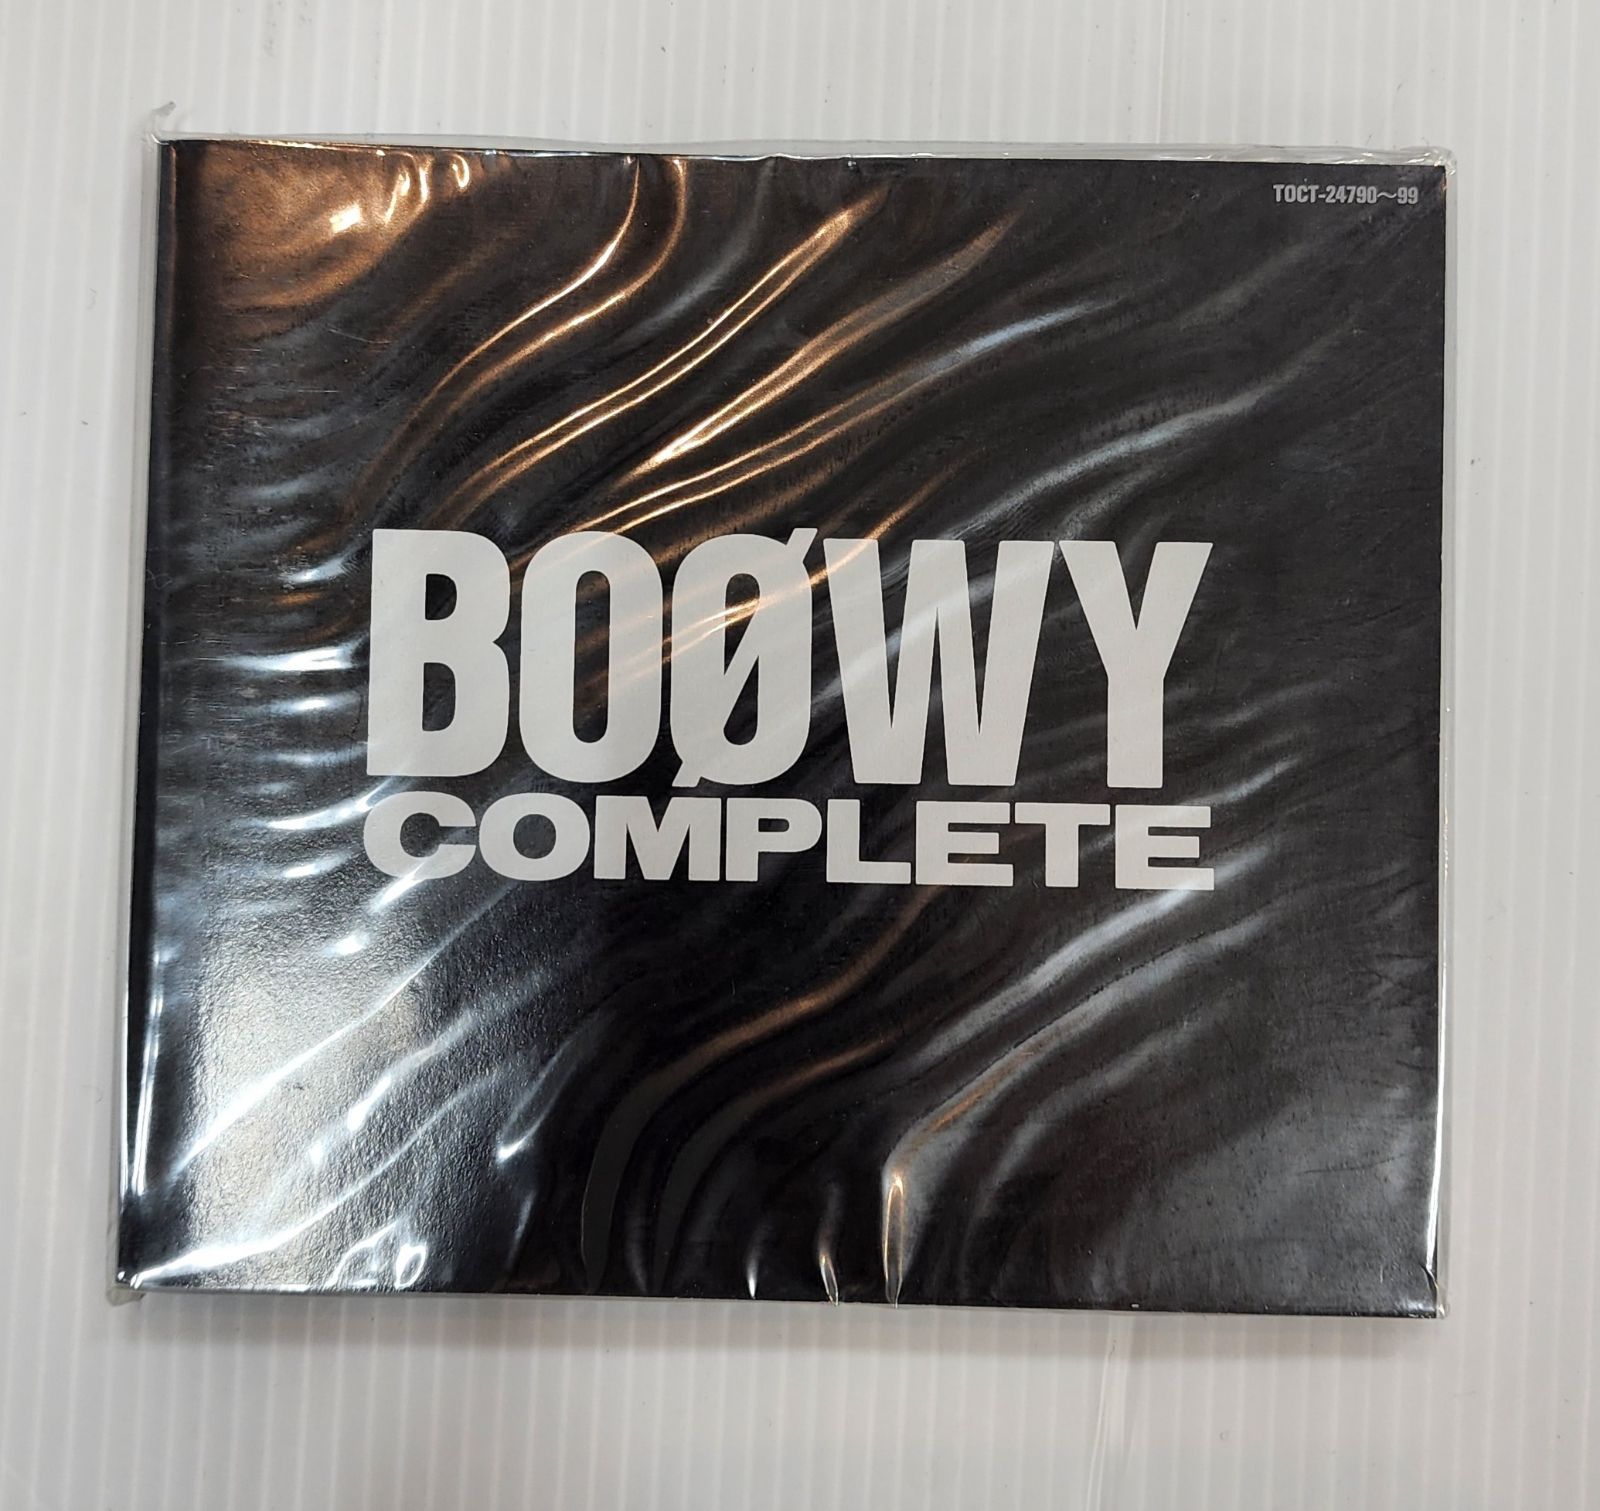 BOOWY COMPLETE - CD